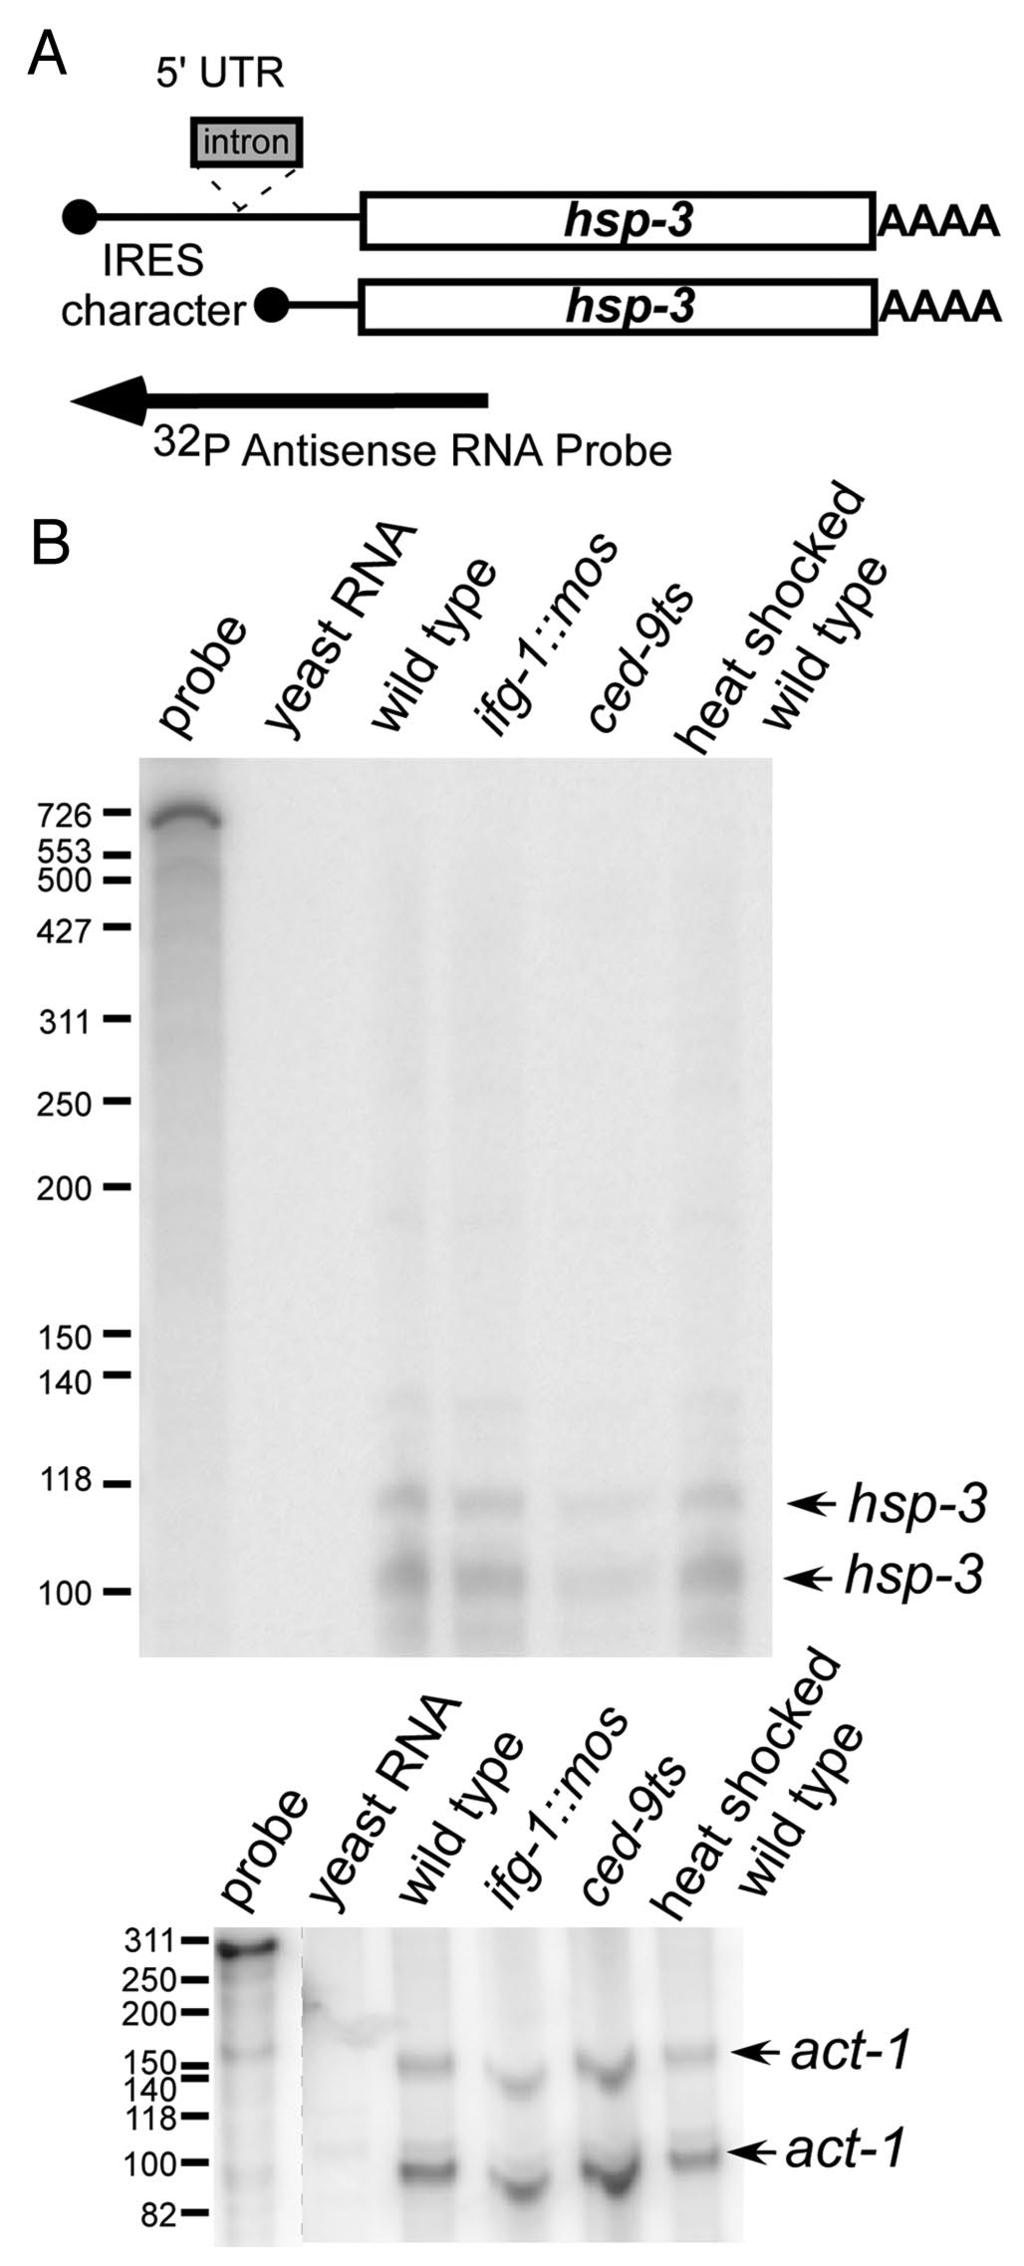 Figure 4. 5 UTR extended hsp-3 mrna is not detected. (A) Diagram indicating the coverage of the hsp-3 mrna probe.